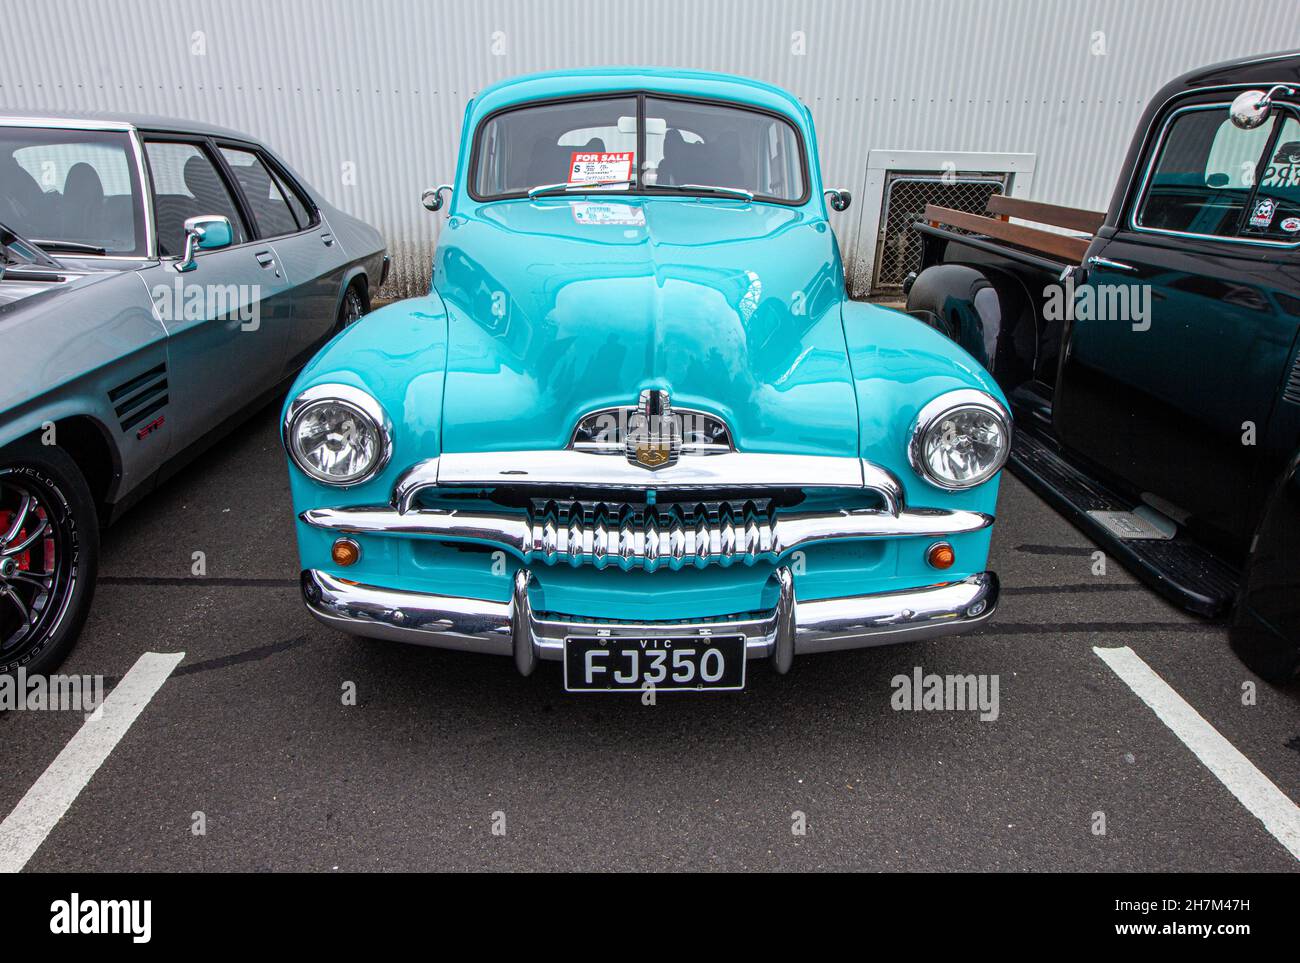 Classic car for sale. 1954 ford ute, light blue. Melbourne Car show Father's day. St Kilda, Victoria, Australia, September 2nd, 2018. Stock Photo